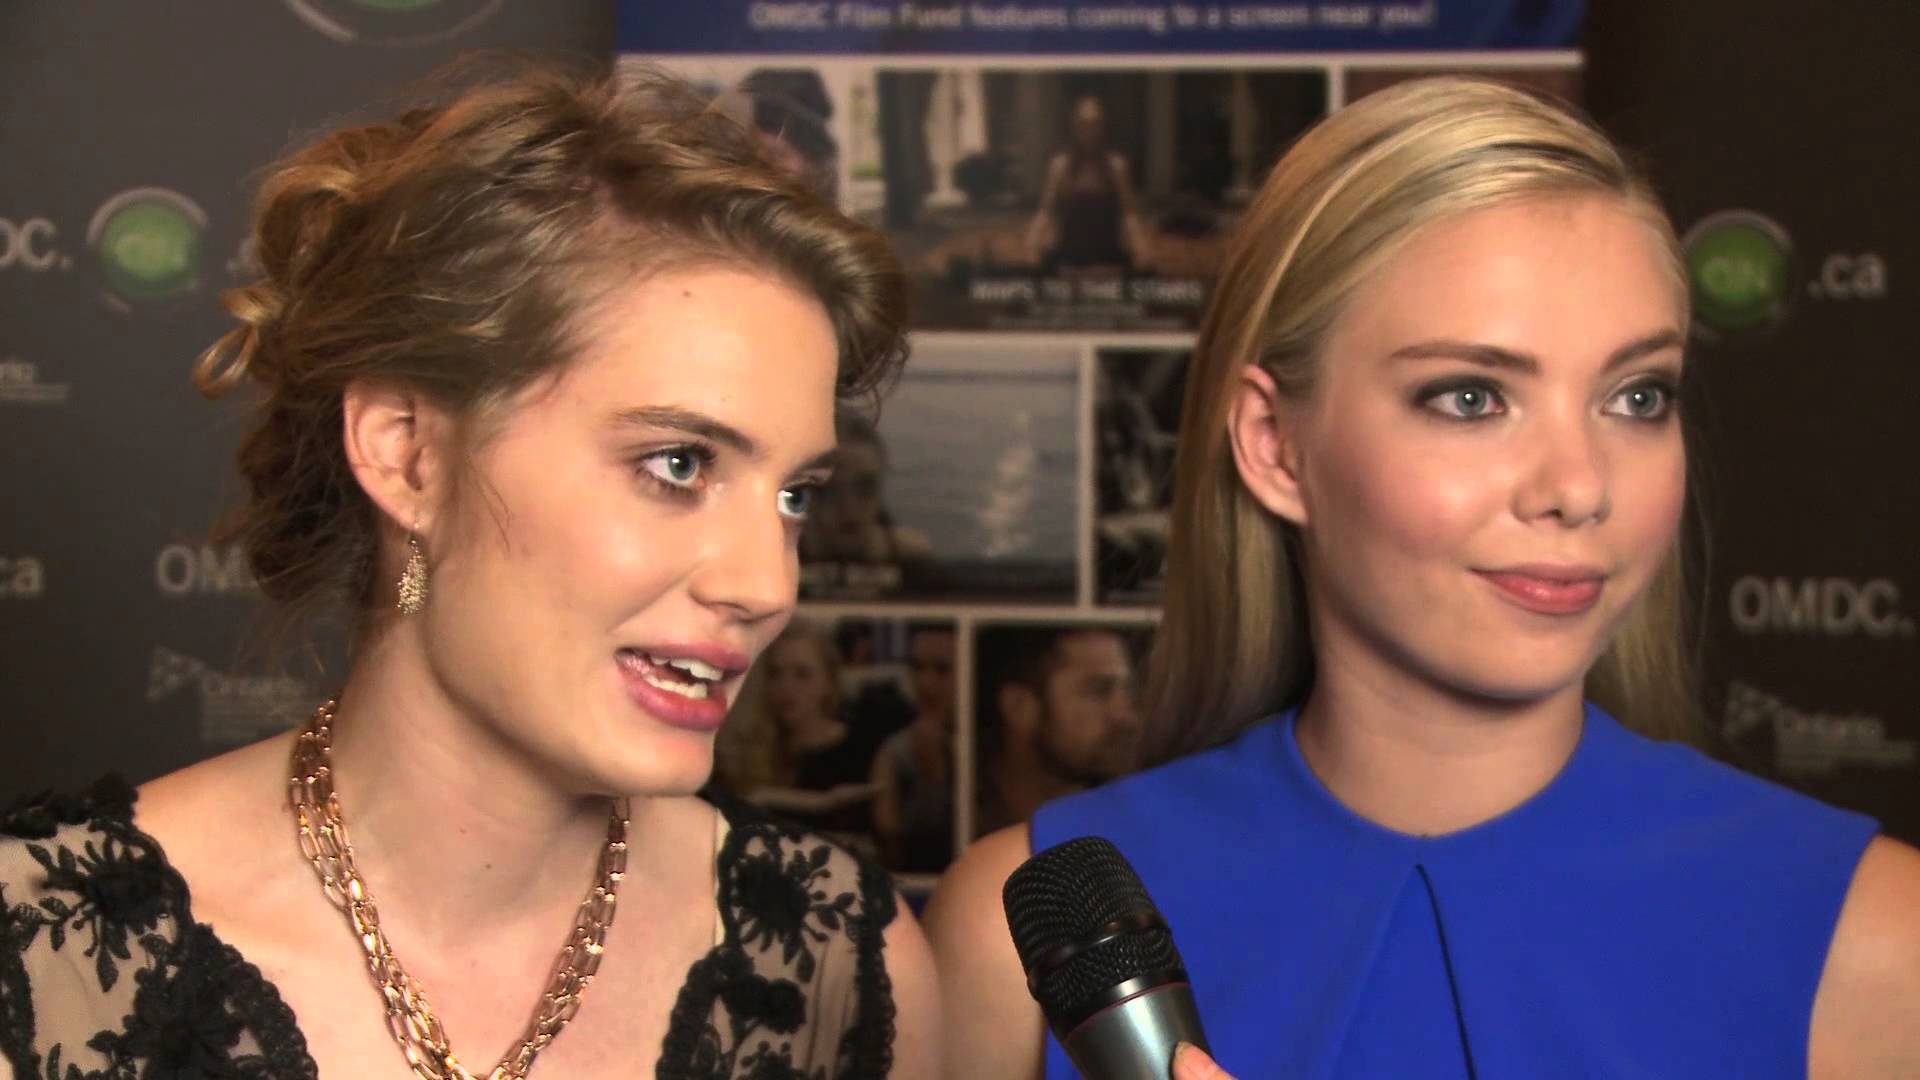 Clara Pasieka & Emilia McCarthy are interviewed on the red carpet at the OMDC gala at TIFF 2014